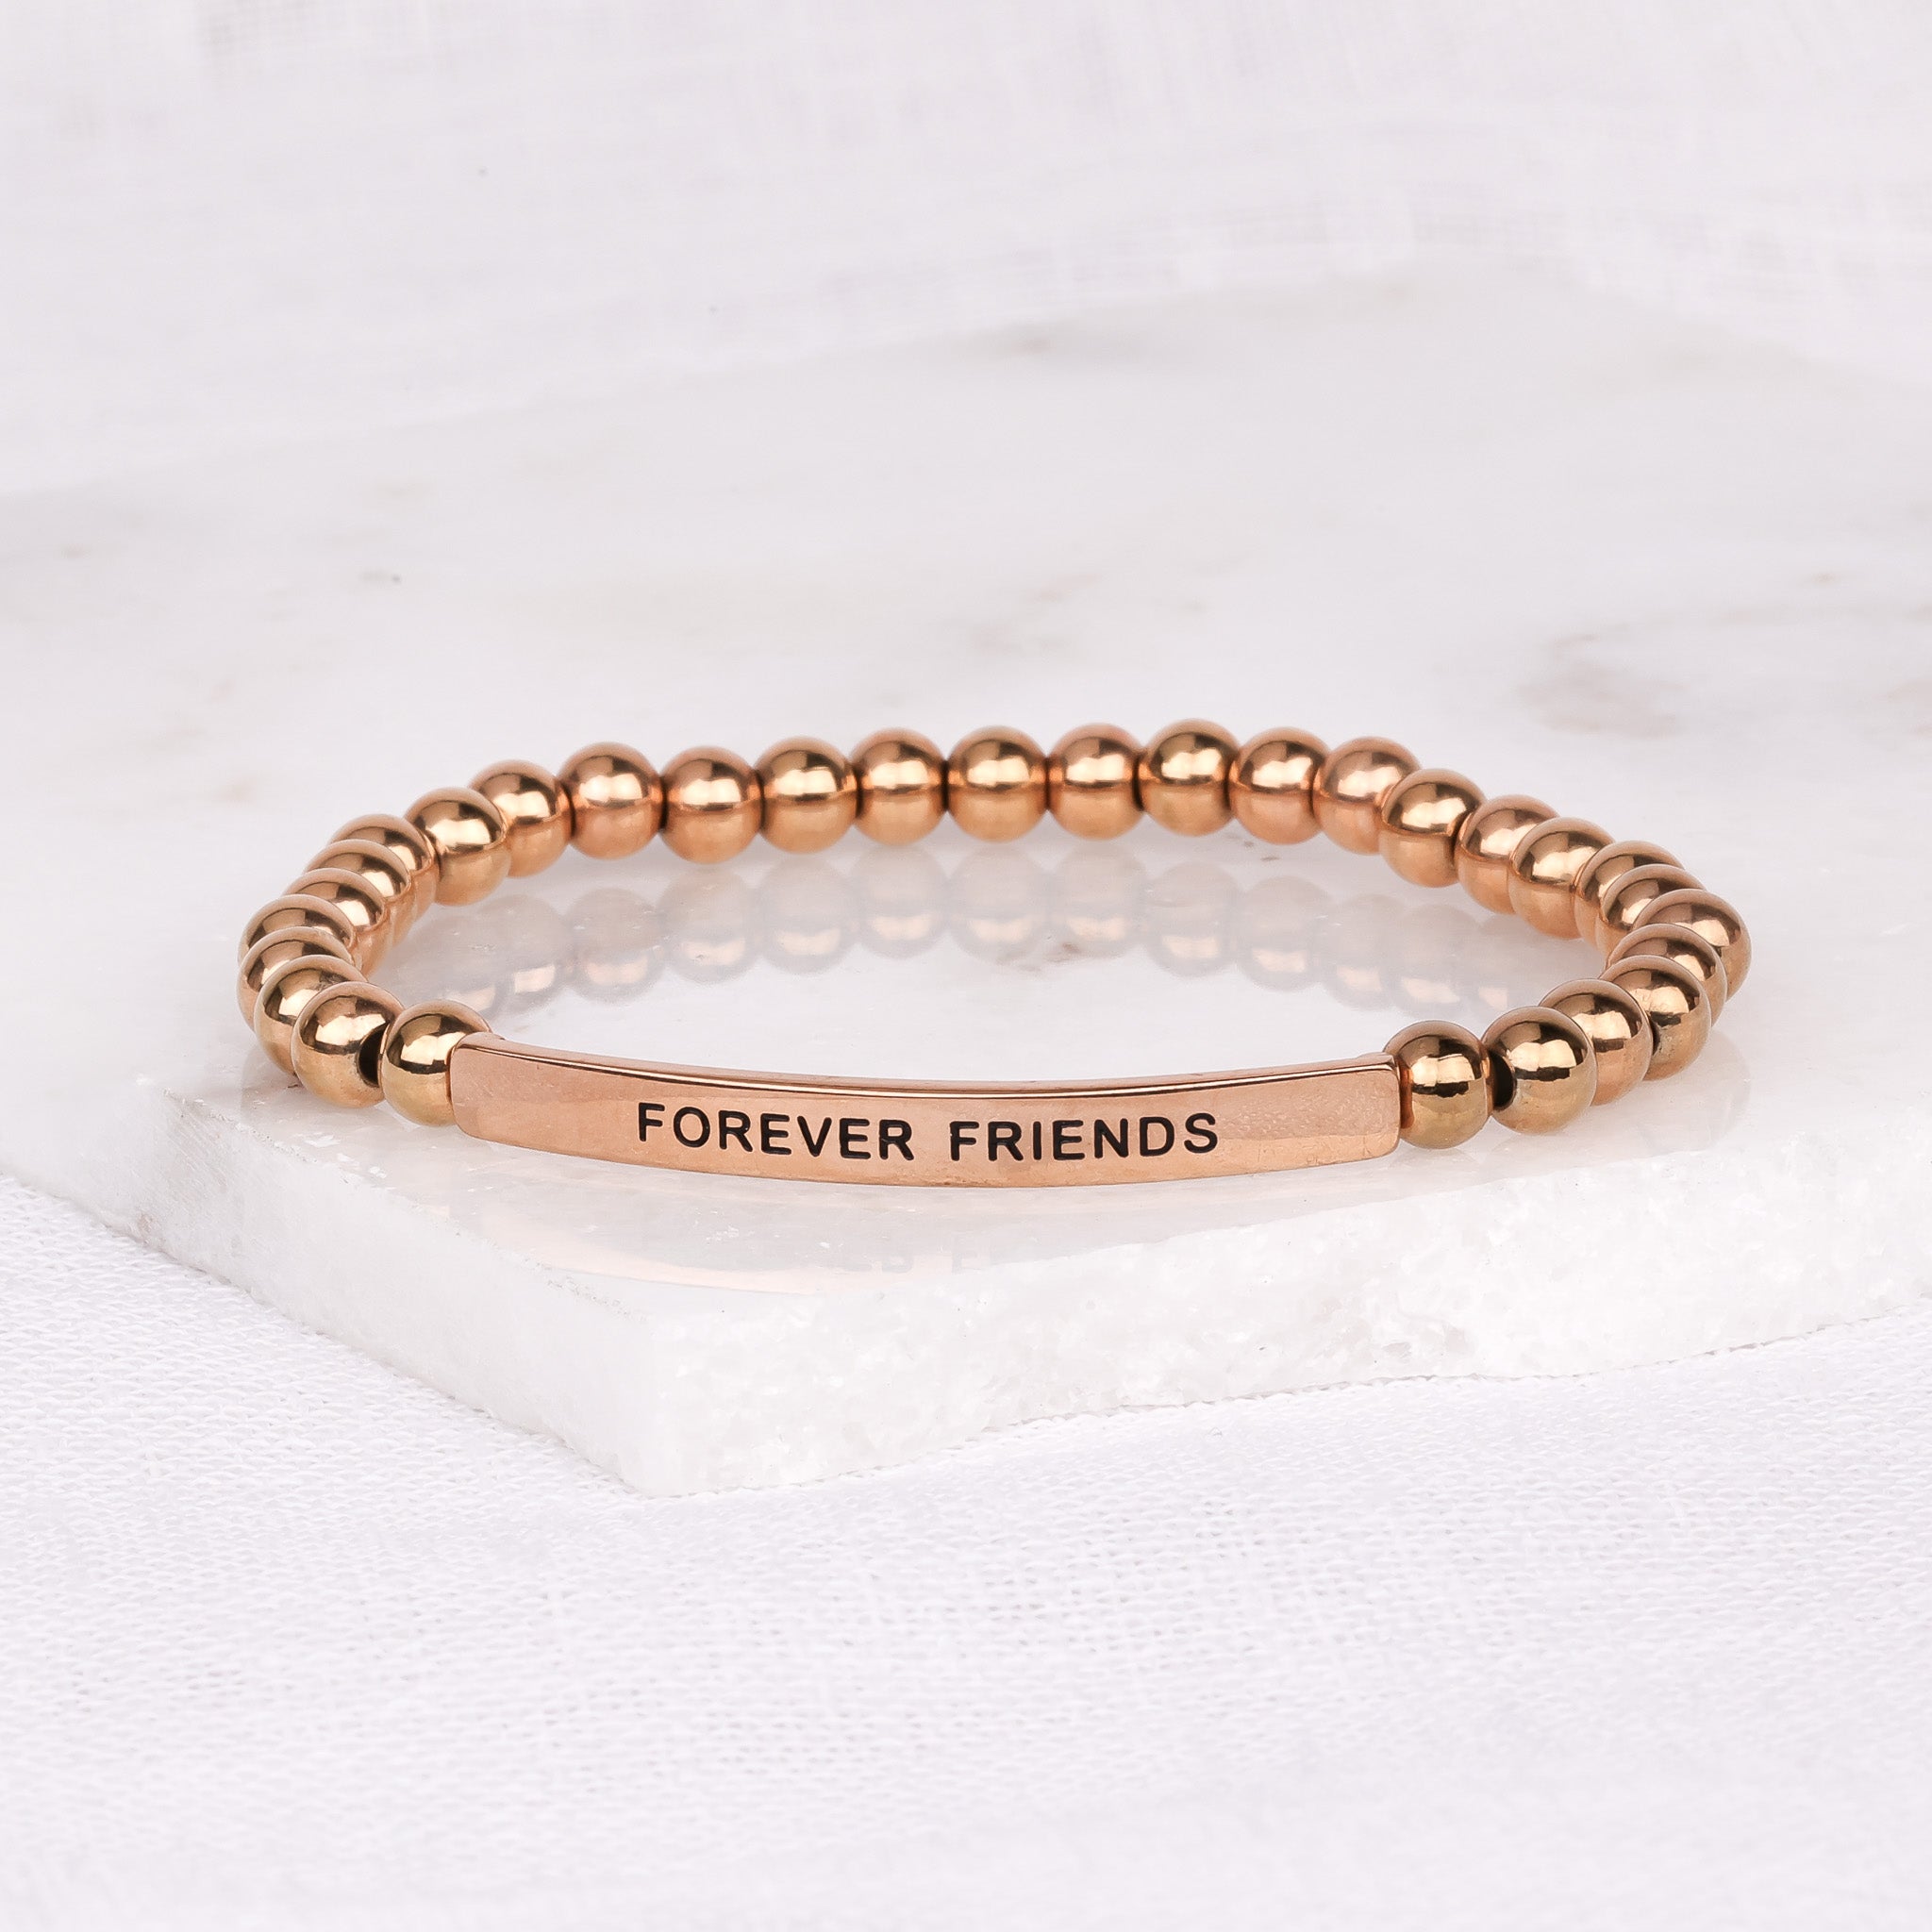 FOREVER FRIENDS - Inspiration Co.